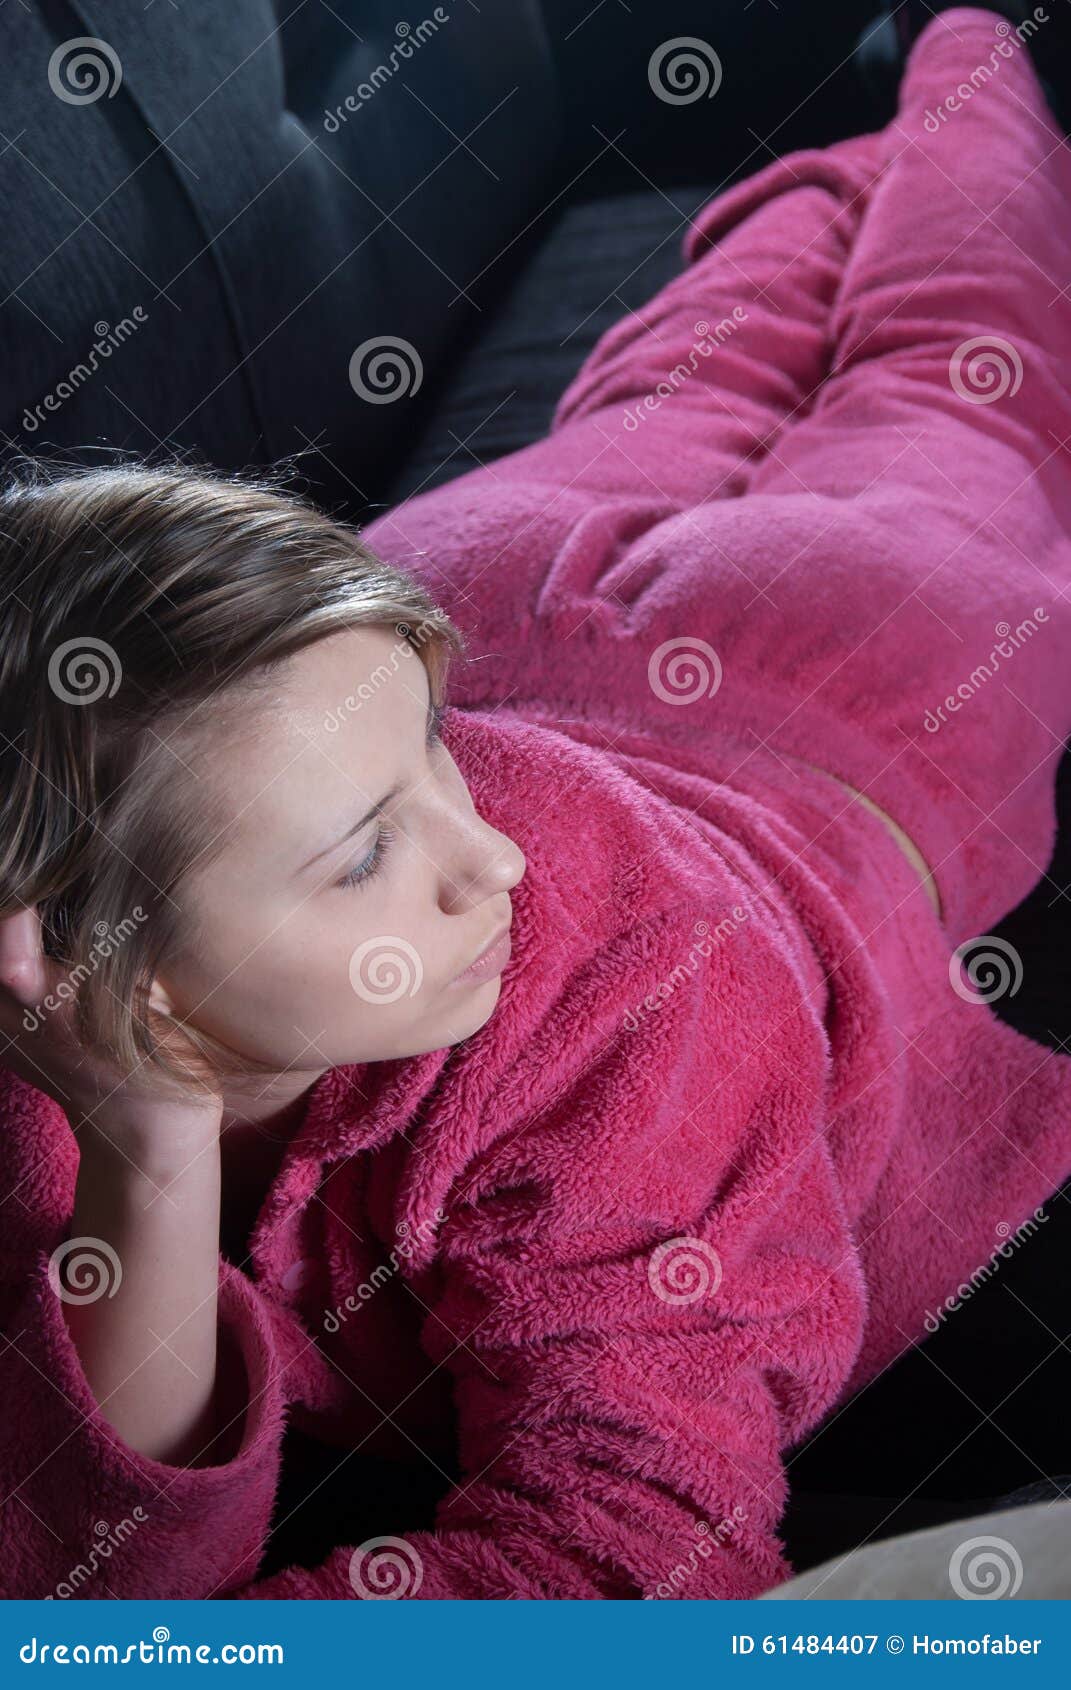 Teen With Pajamas On The Couch Stock Image Image Of Calm Joyful 61484407